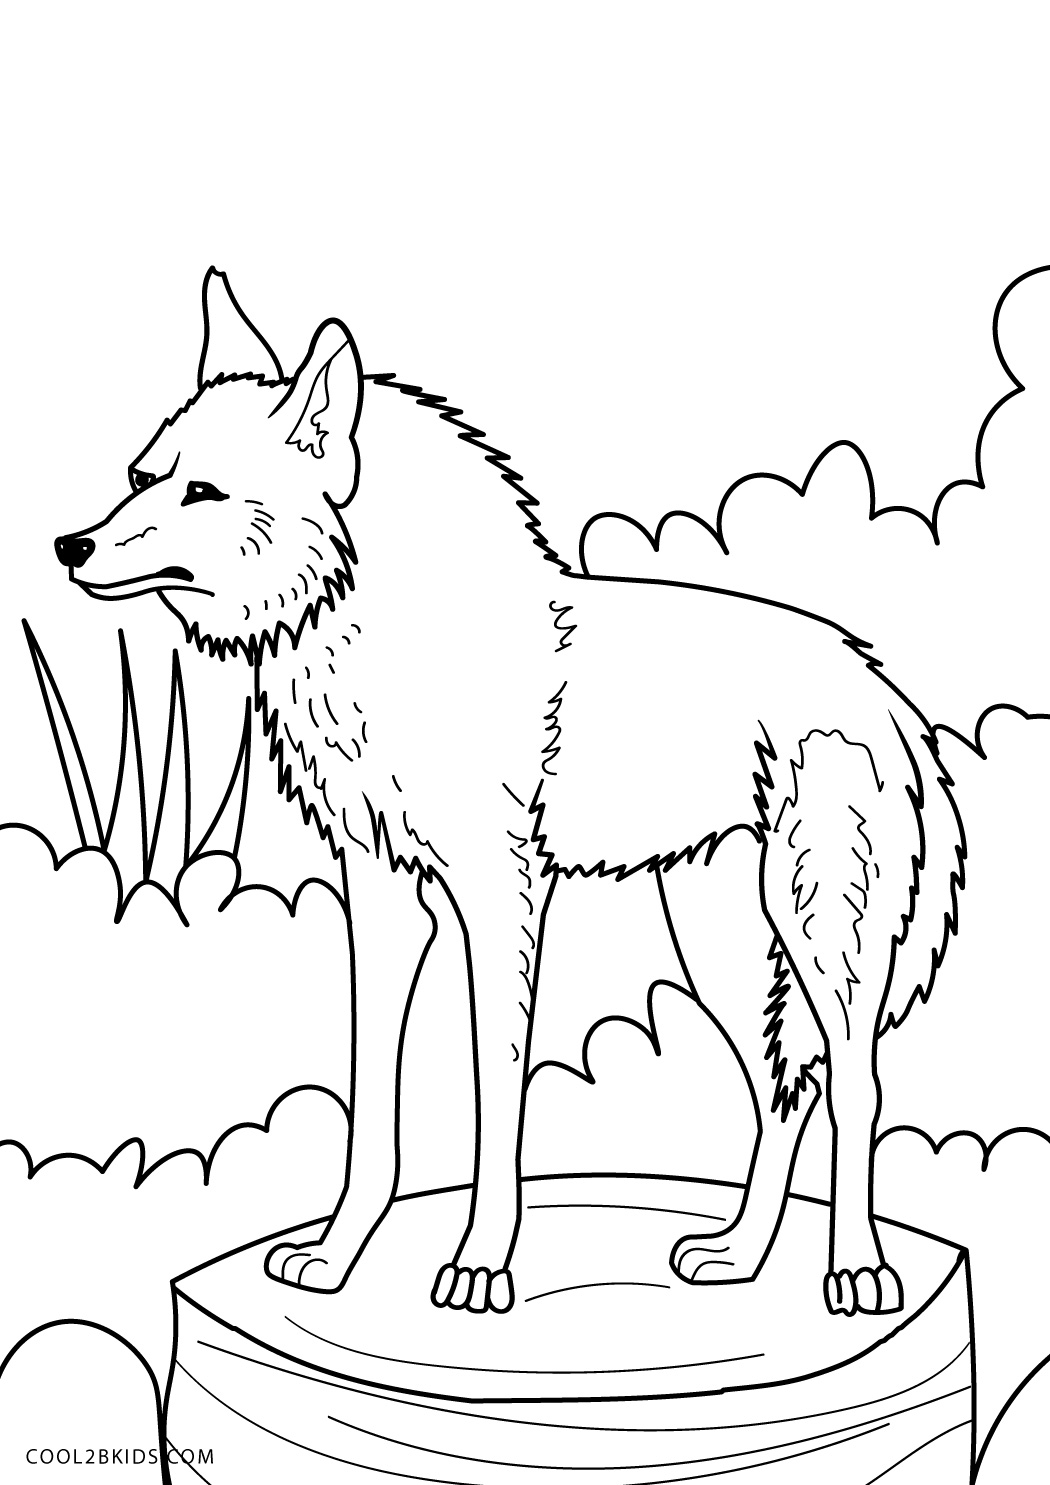 coloring pages of wolves howling